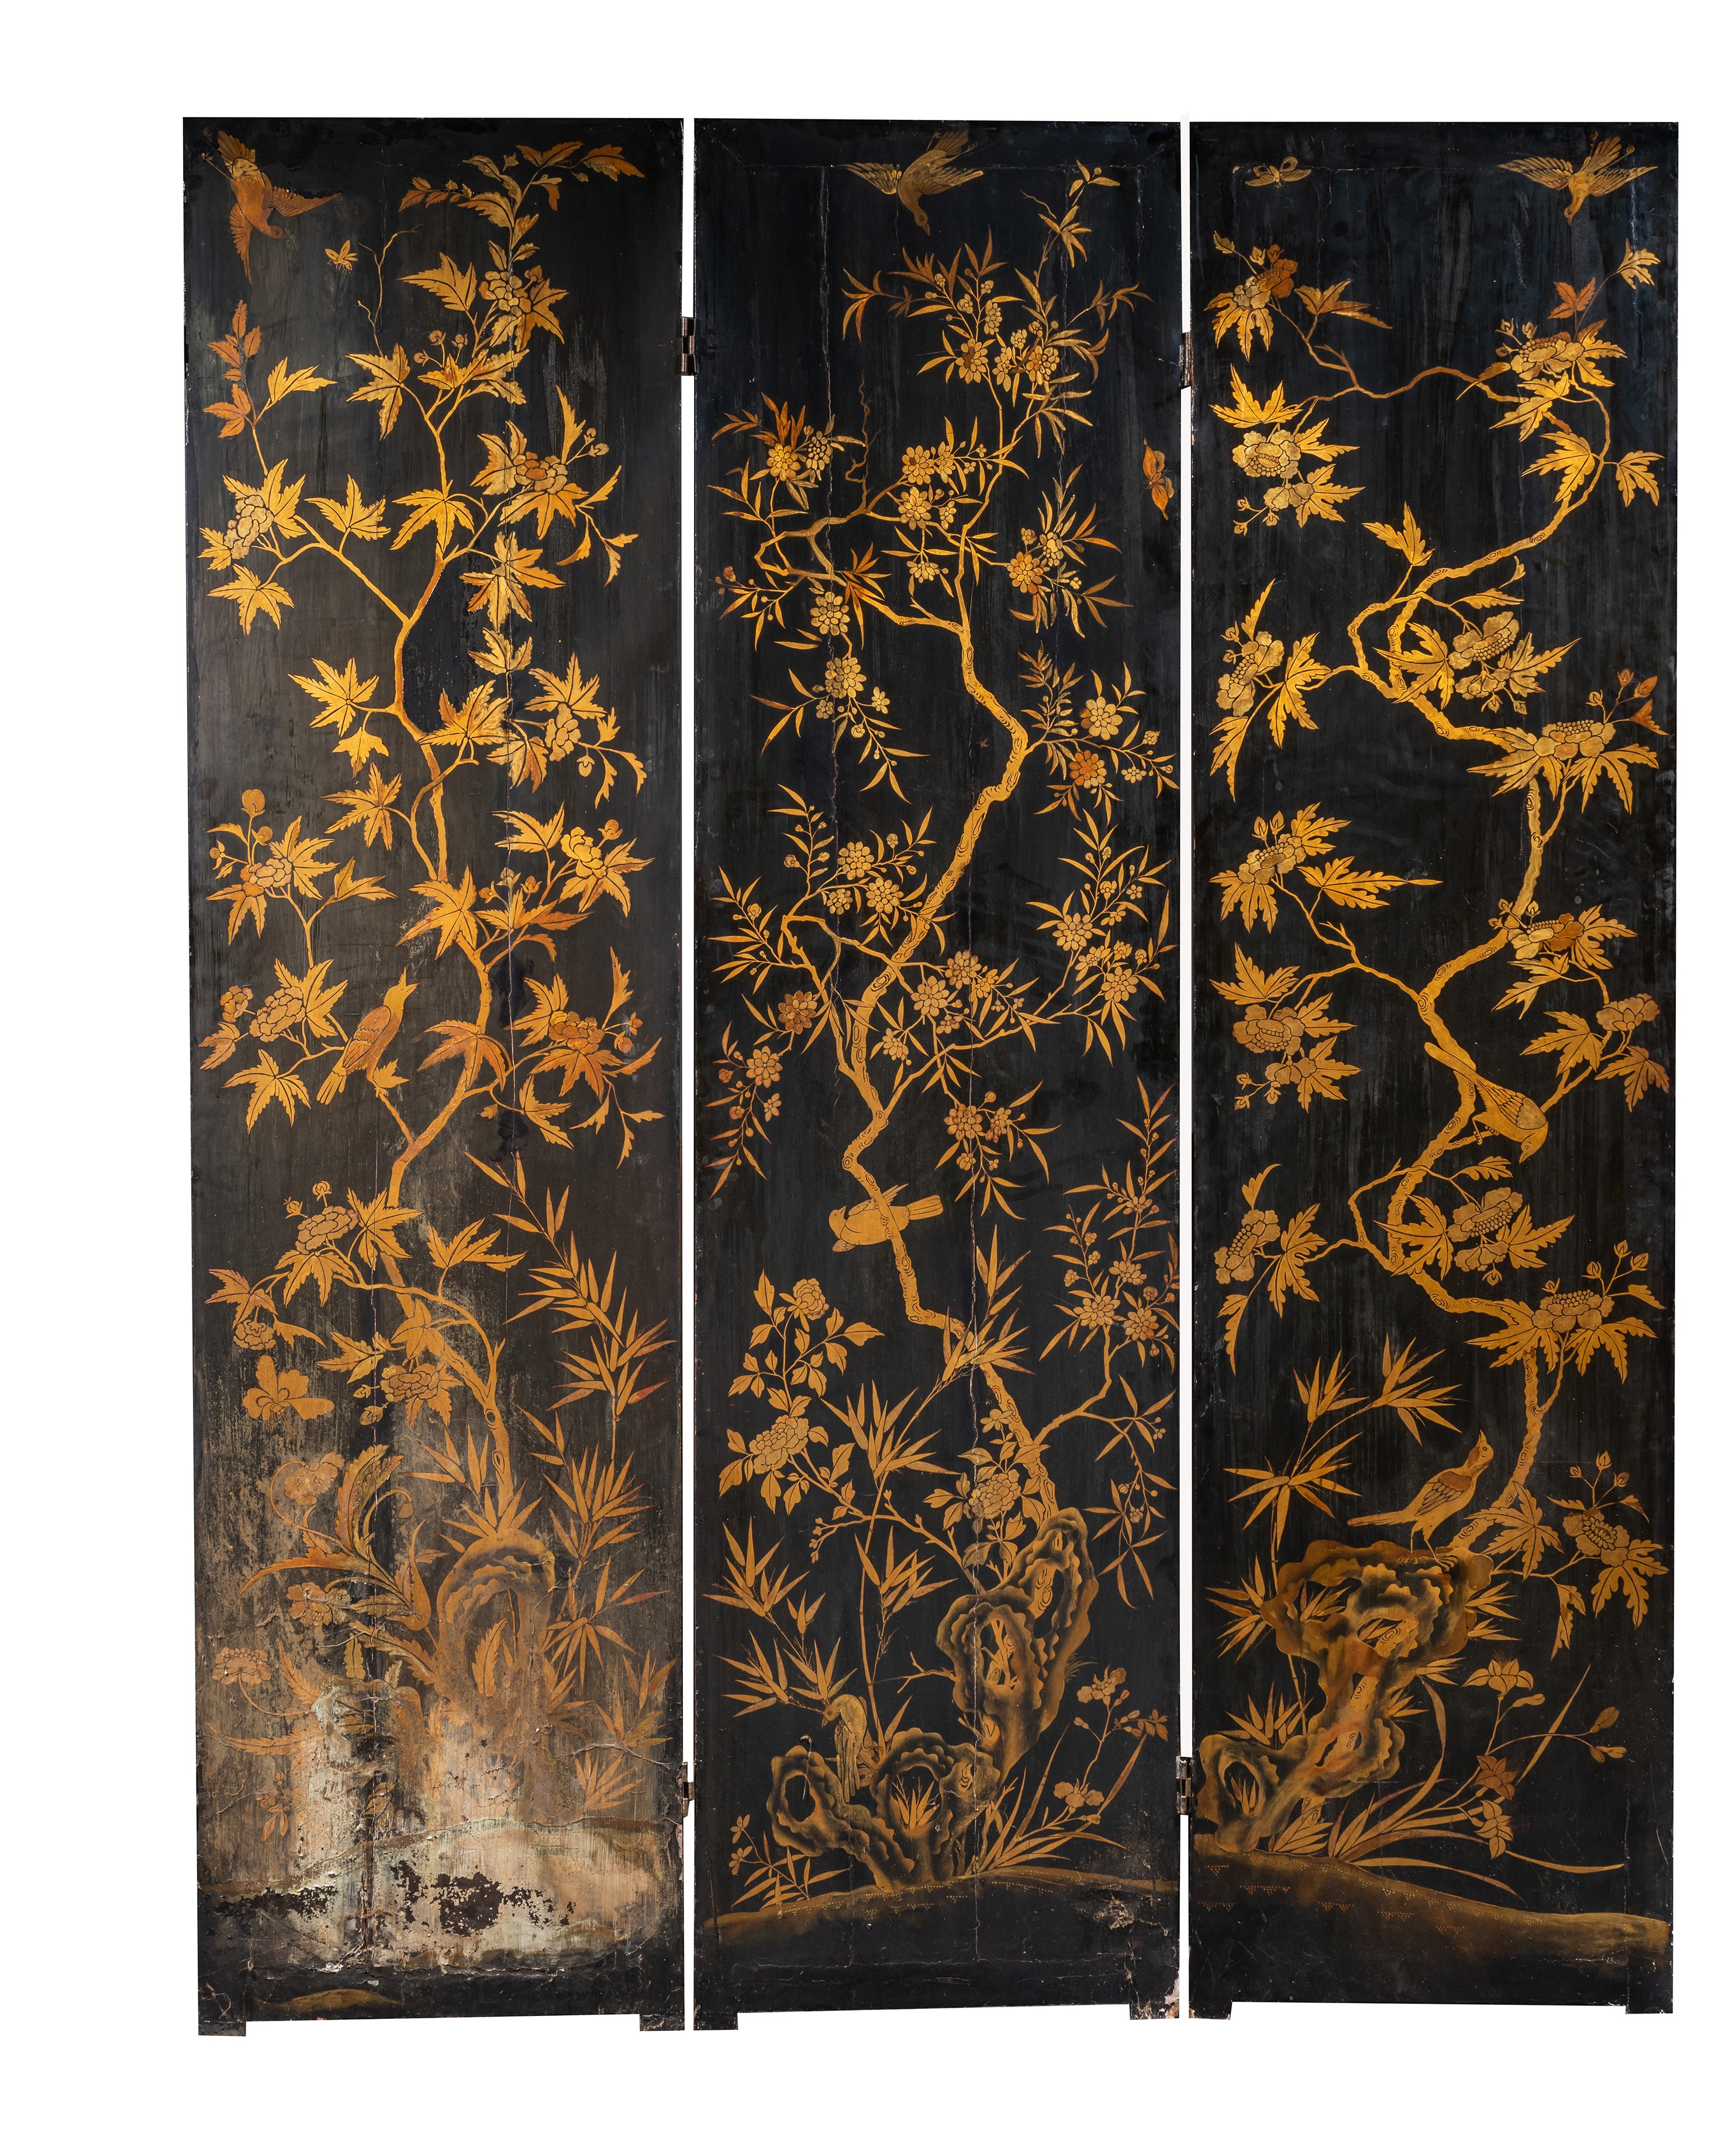 A Chinese export eight-panel gilt and black lacquer screen, late Qing dynasty, late 18thC/early 19th - Image 6 of 9